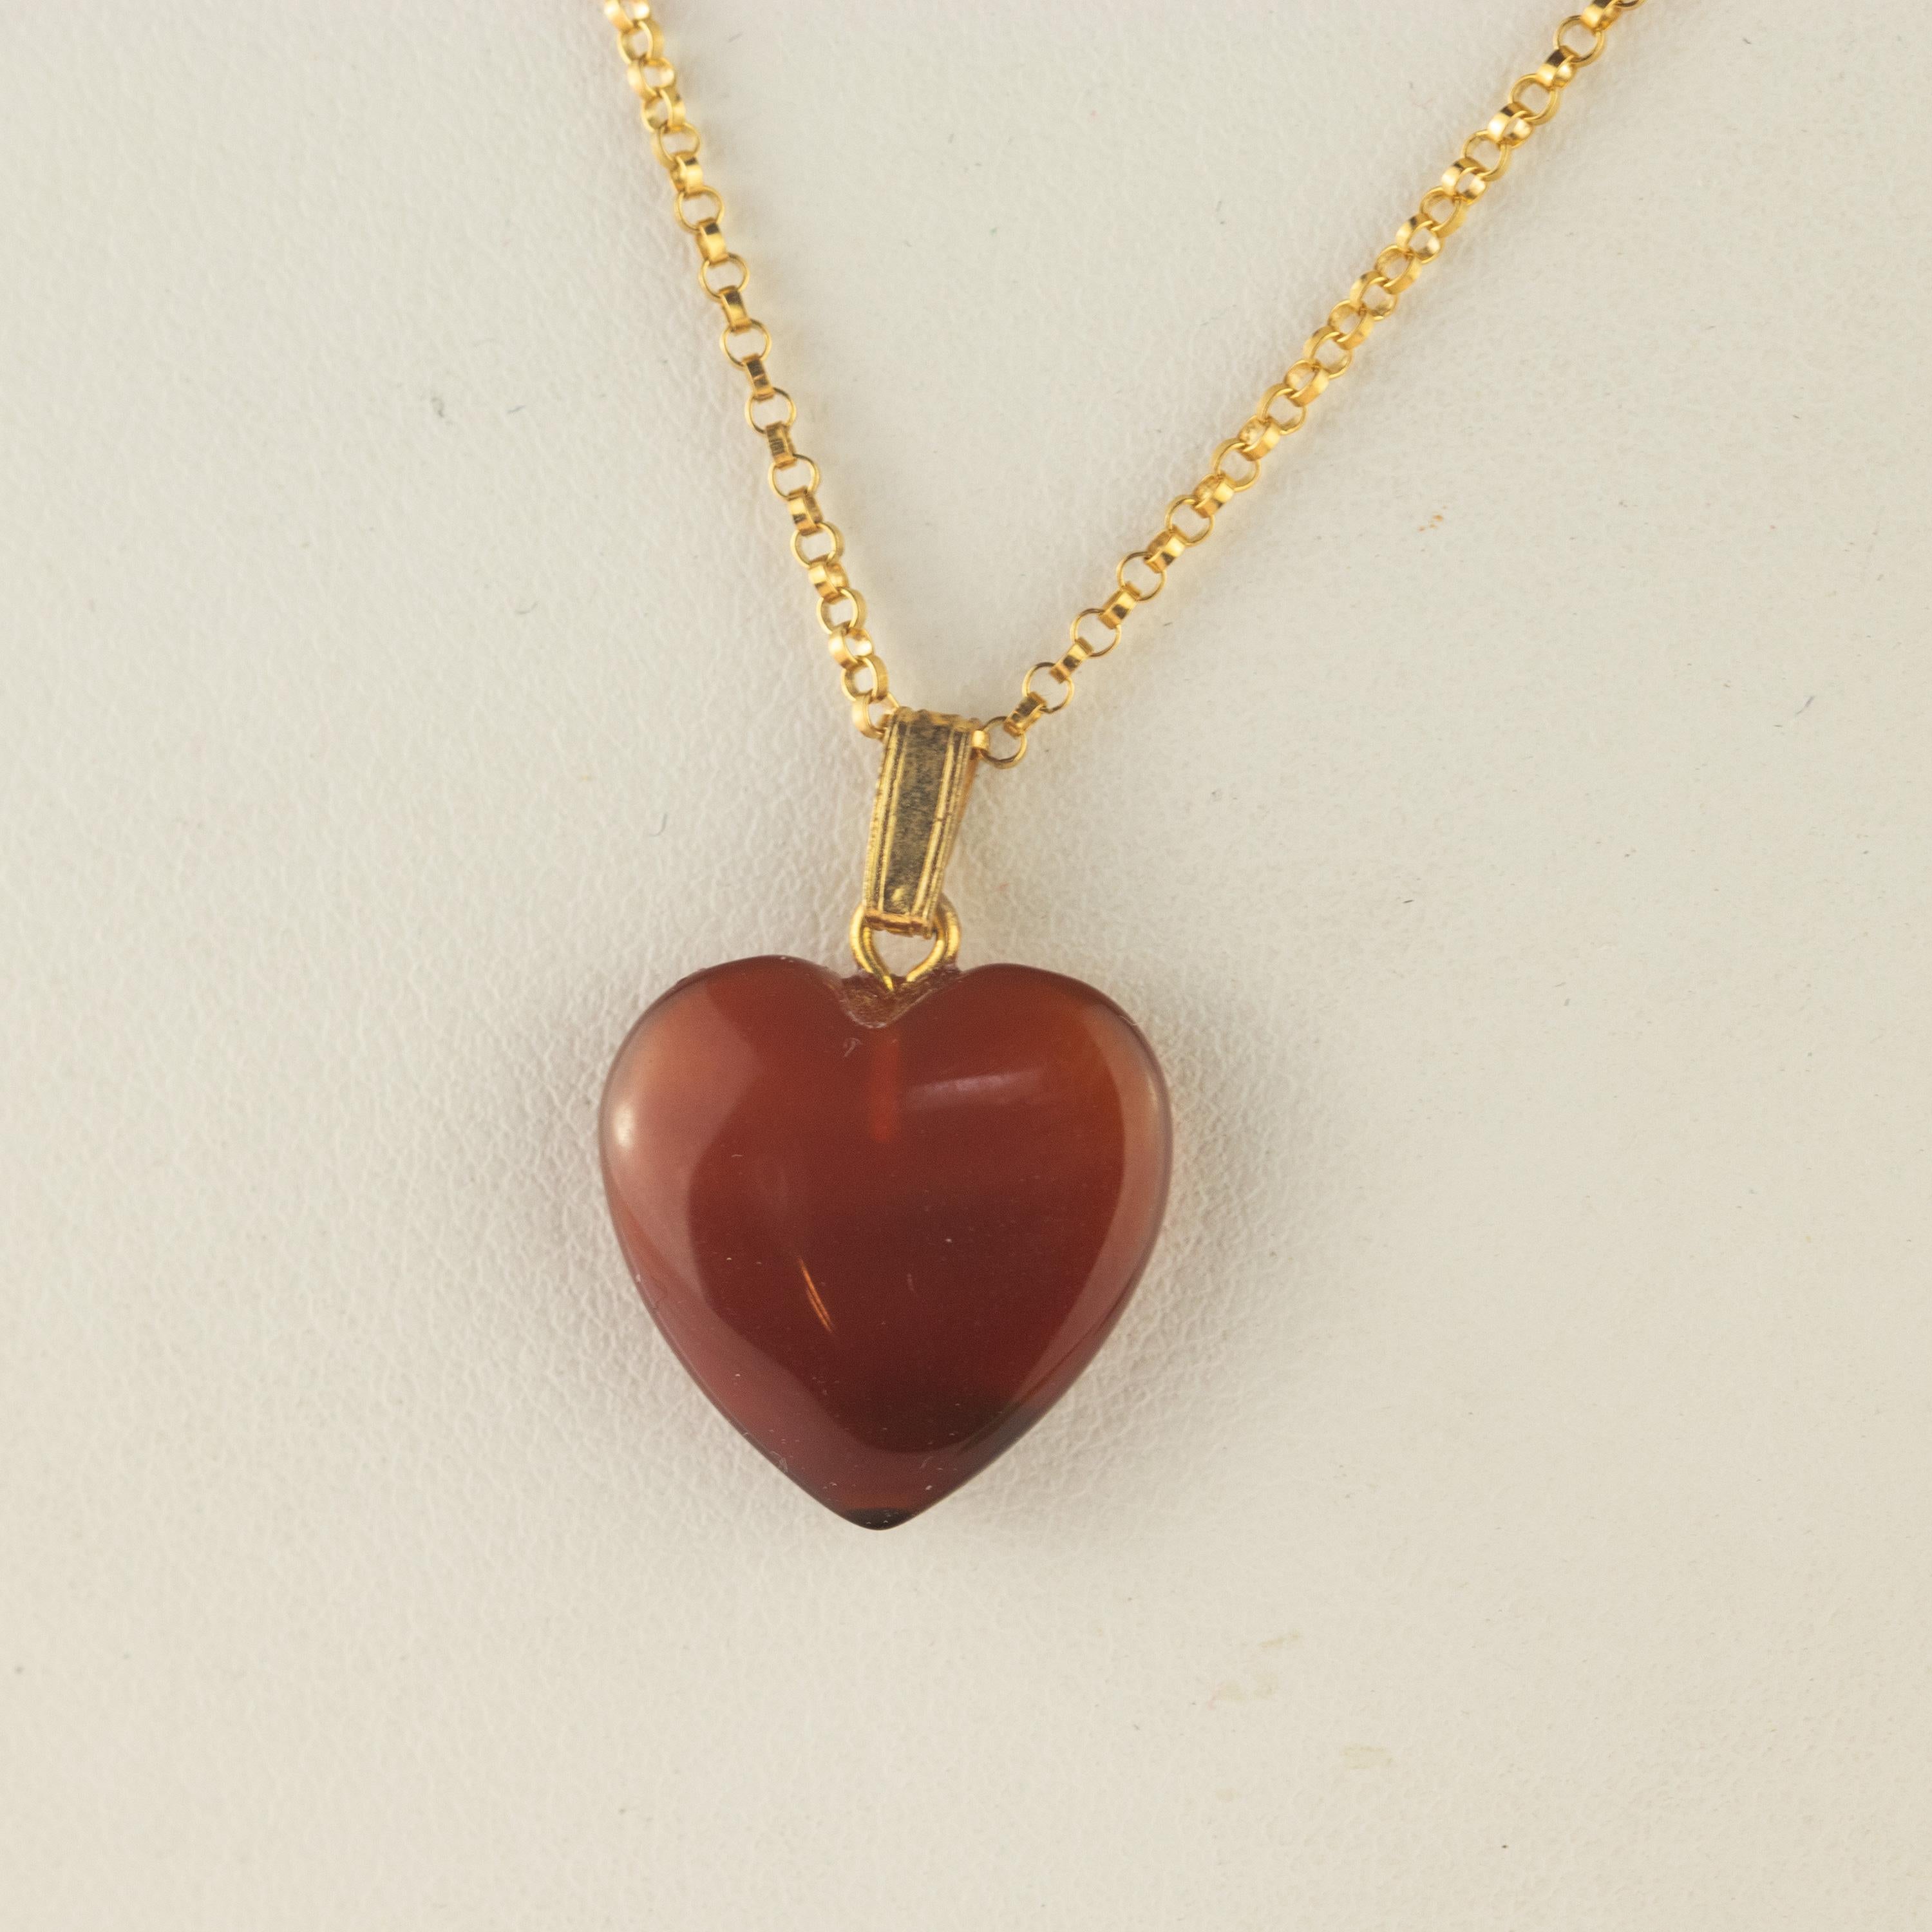 Take love with you everywhere! This breathtaking necklace has a sweet design with the most precious gemstone hanging from a delicate 18 karat gold chain. The Natural carnelian activates spiritual awareness, opens intuition and enhances your senses